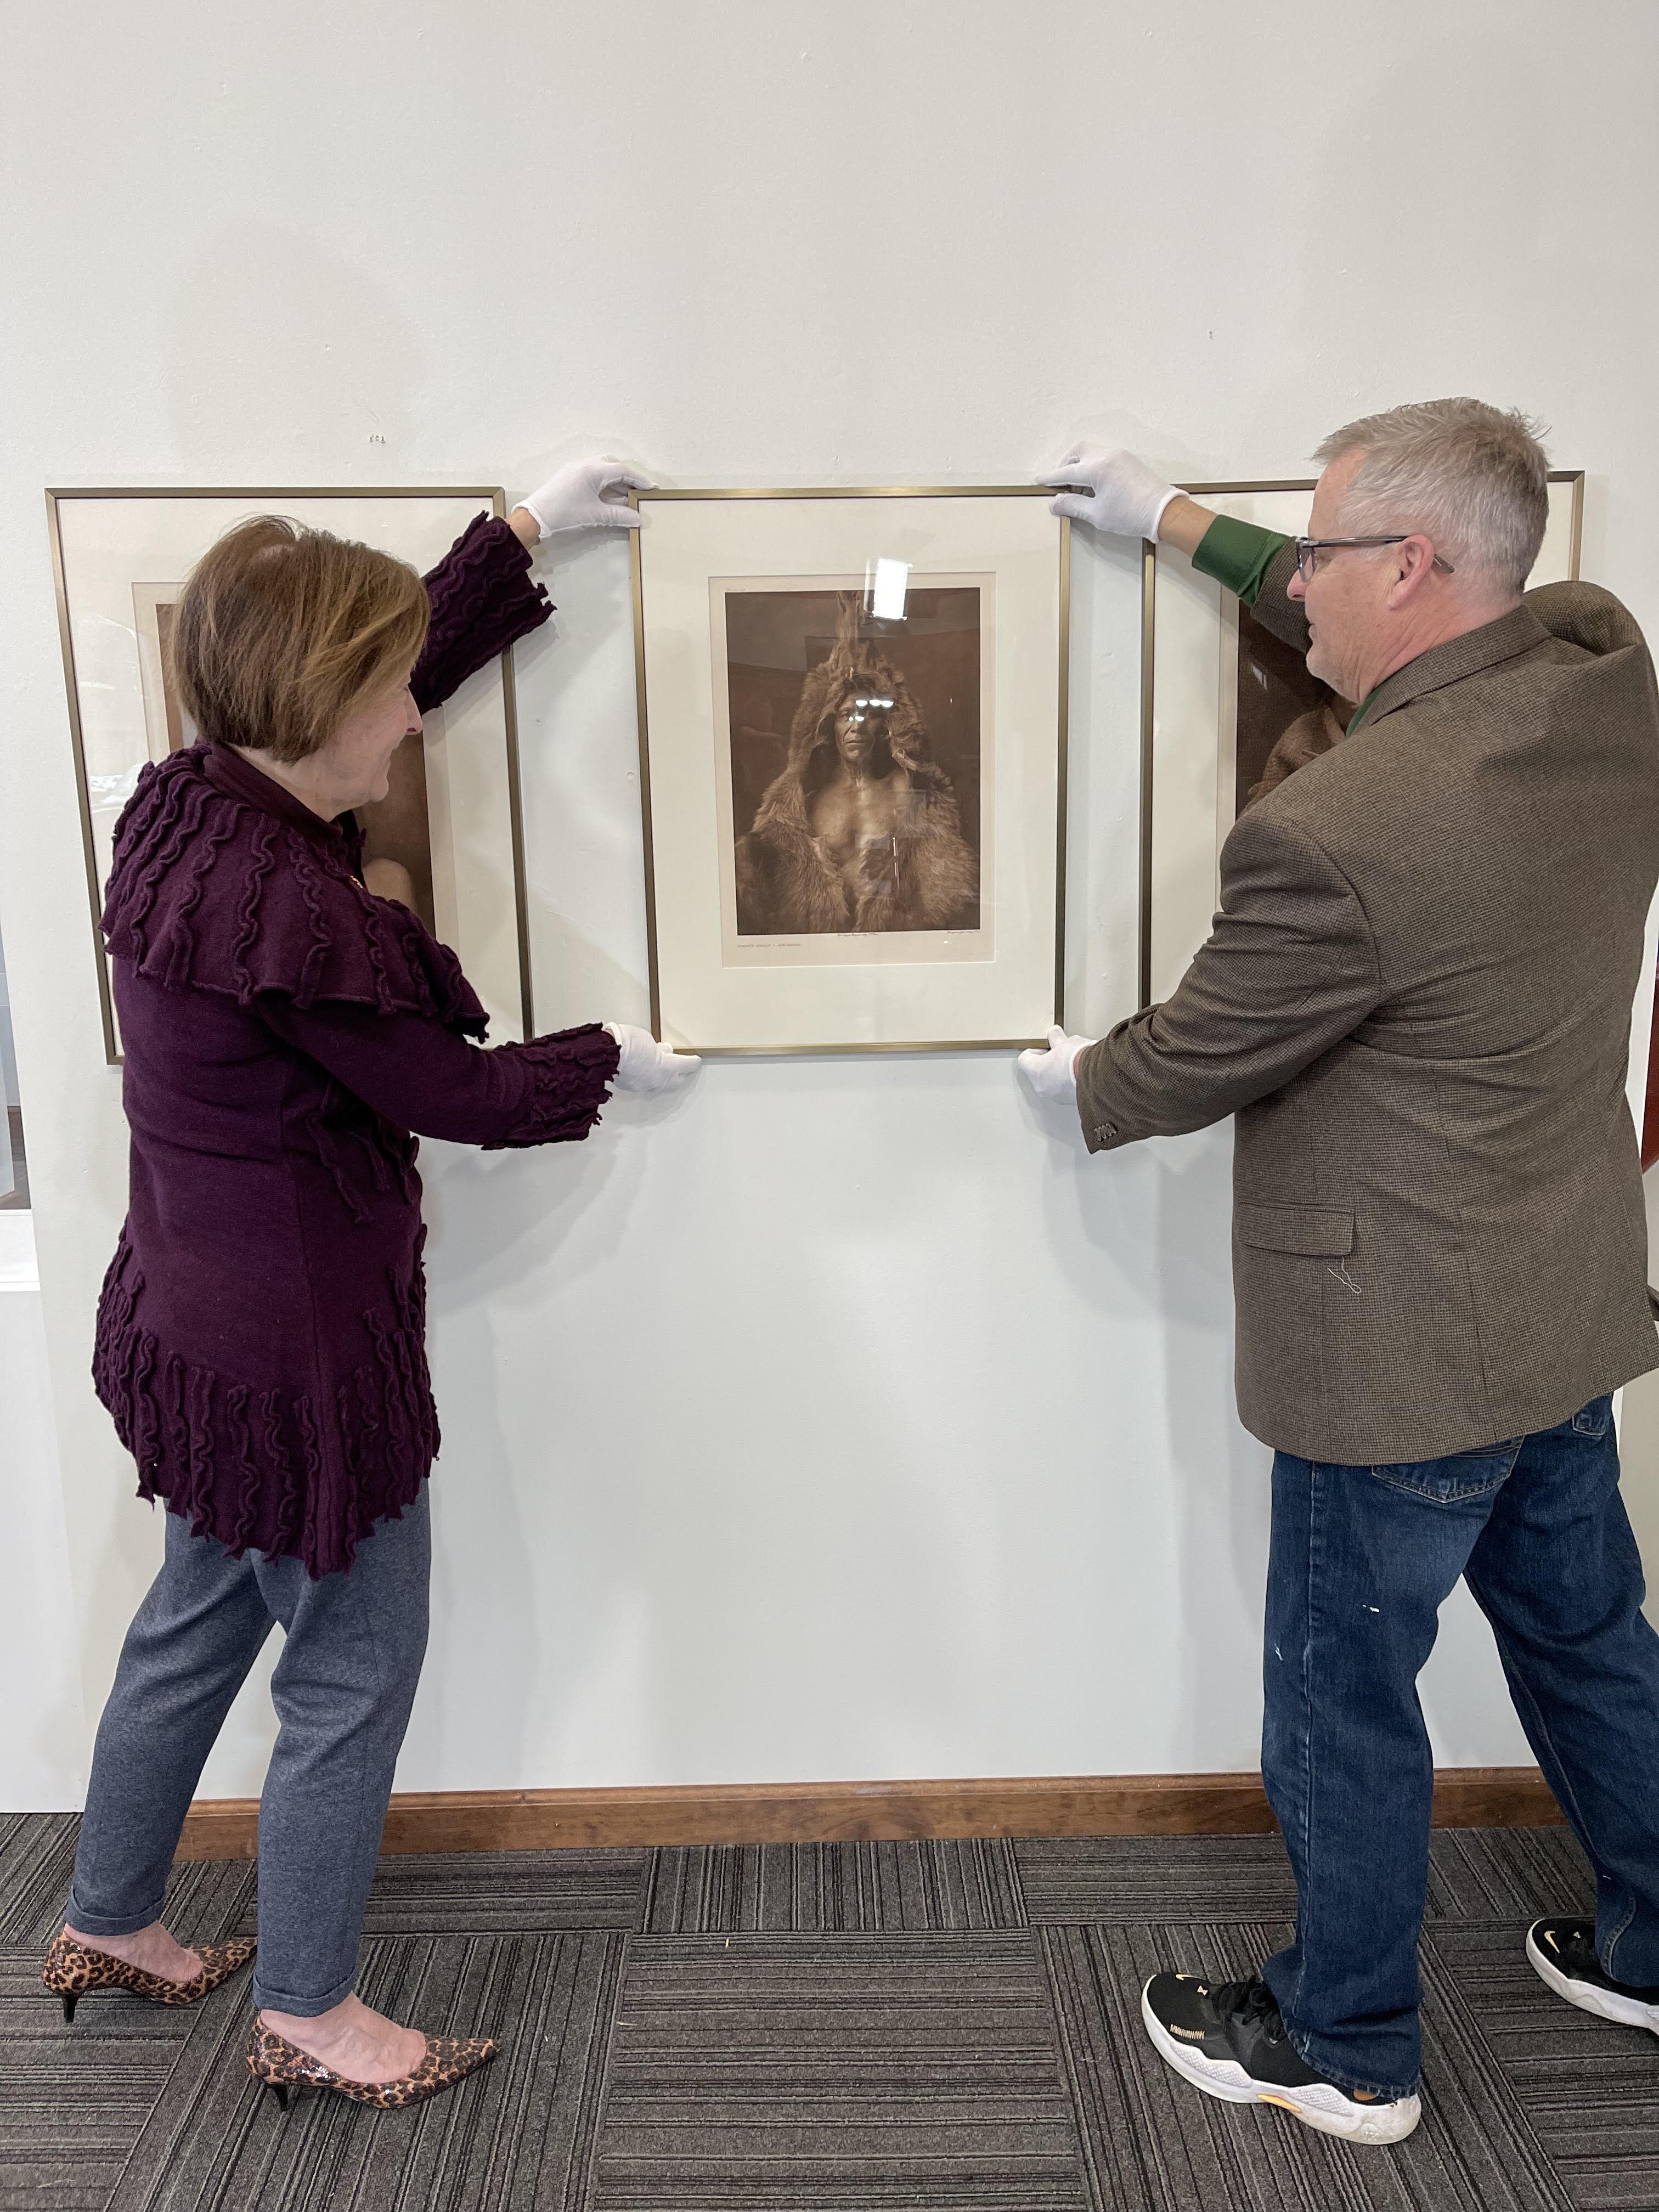 Gallery Coordinator and Curator Angela Green and Museum Director Jim Gabbard install a piece by Edward Curtis.